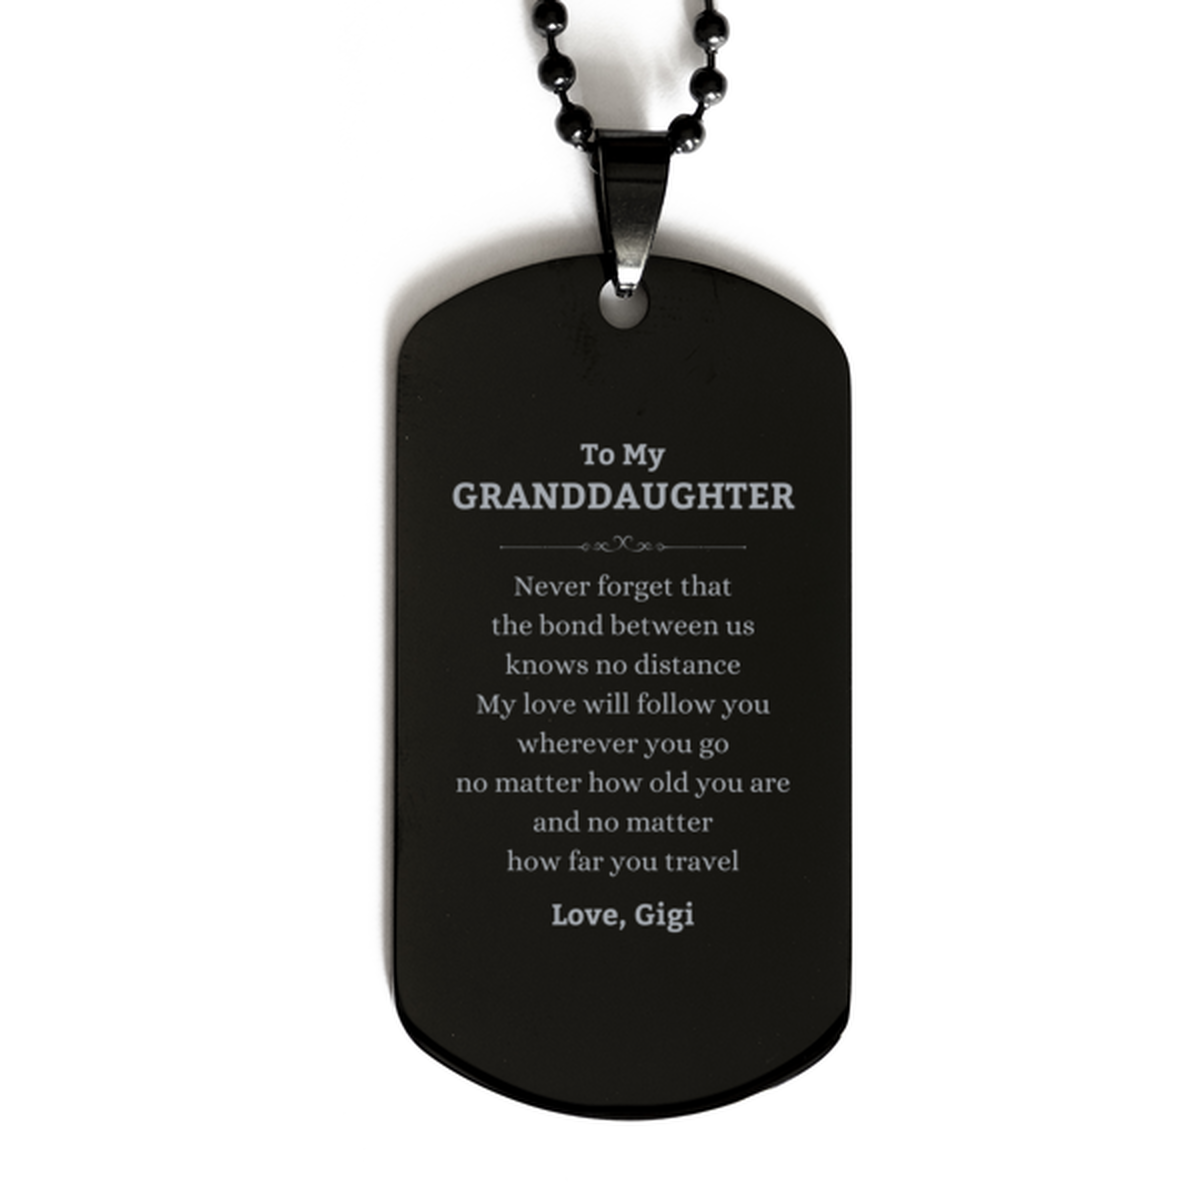 Granddaughter Birthday Gifts from Gigi, Adjustable Black Dog Tag for Granddaughter Christmas Graduation Unique Gifts Granddaughter Never forget that the bond between us knows no distance. Love, Gigi